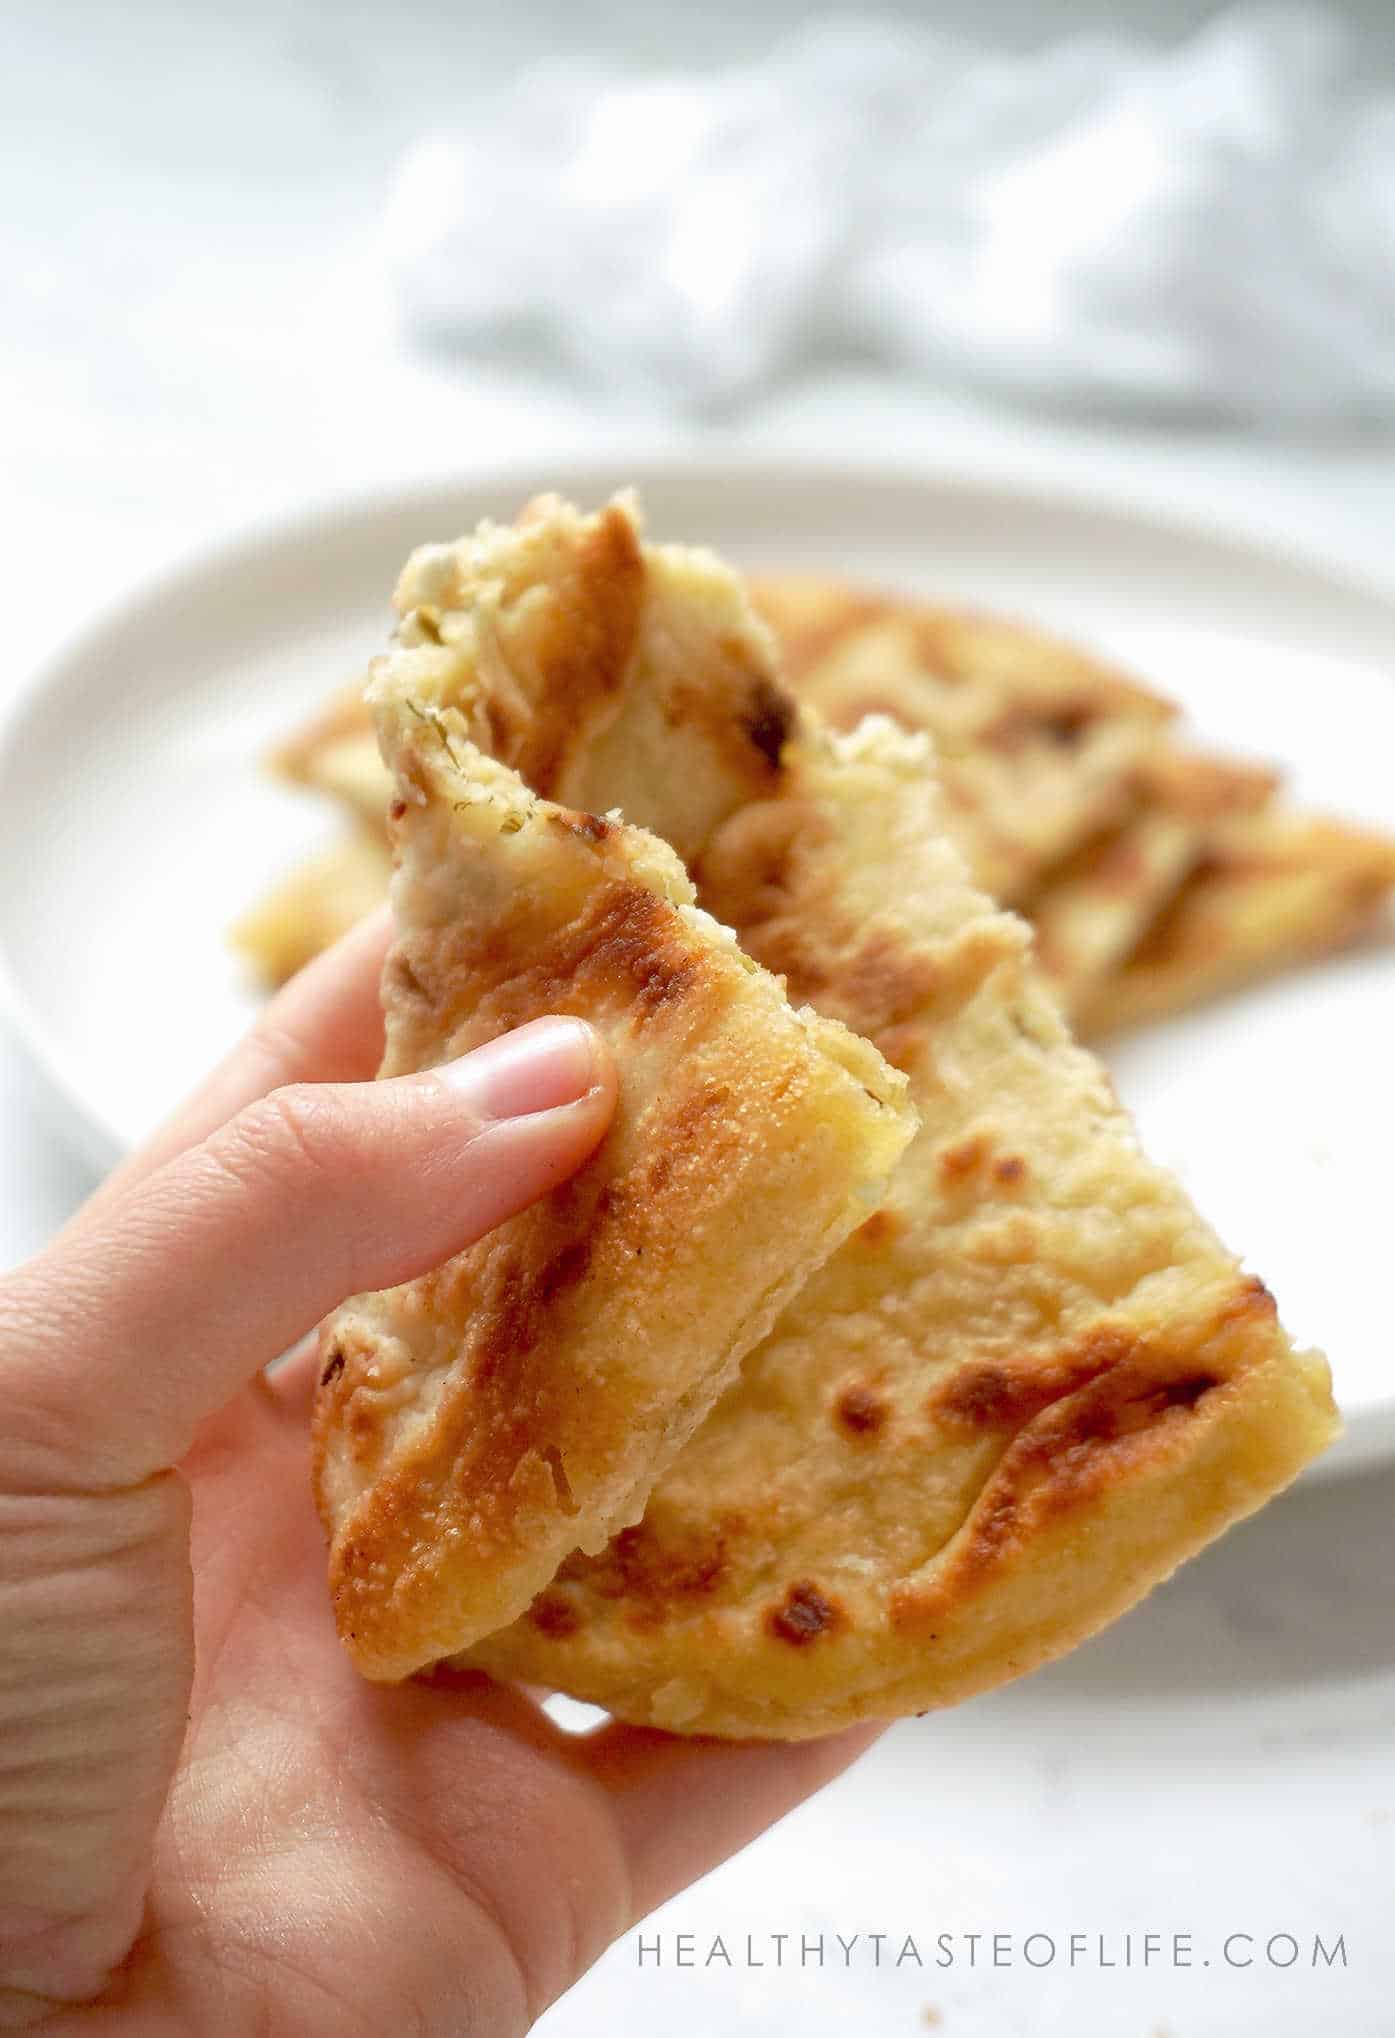 stuffed flatbread recipe with cheese filling